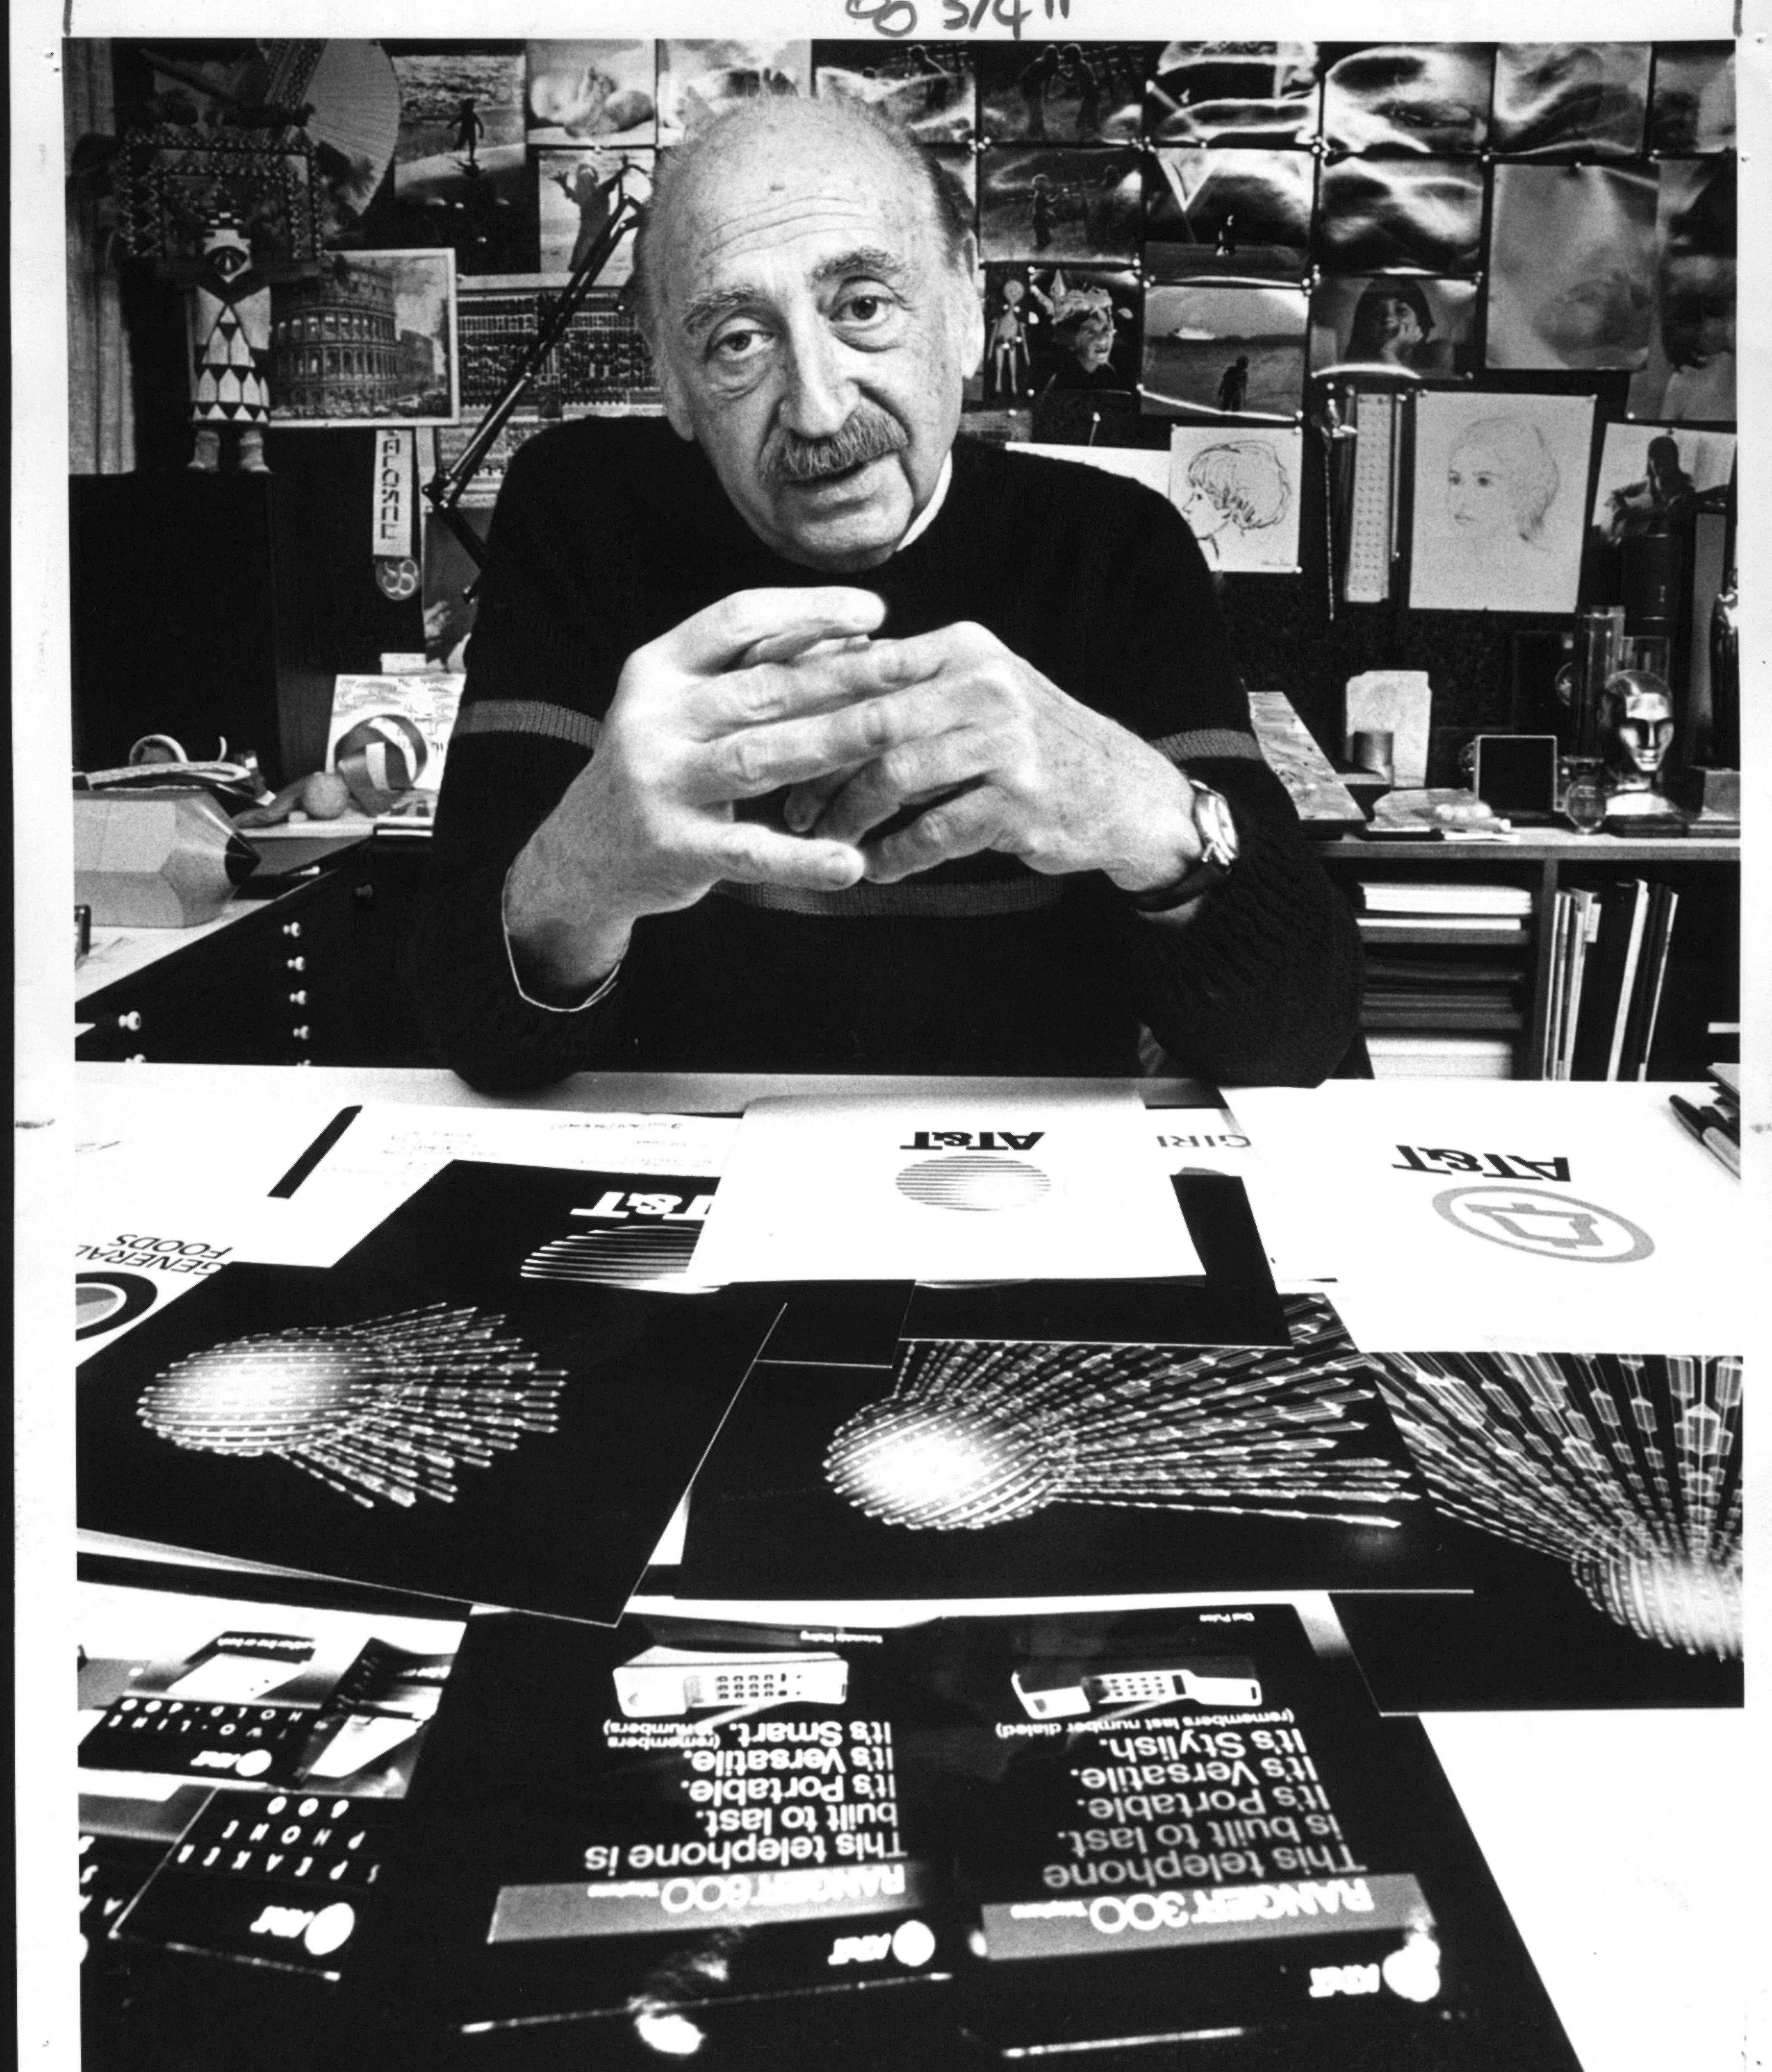 Remembering Saul Bass: The Designer Who Changed Cinema